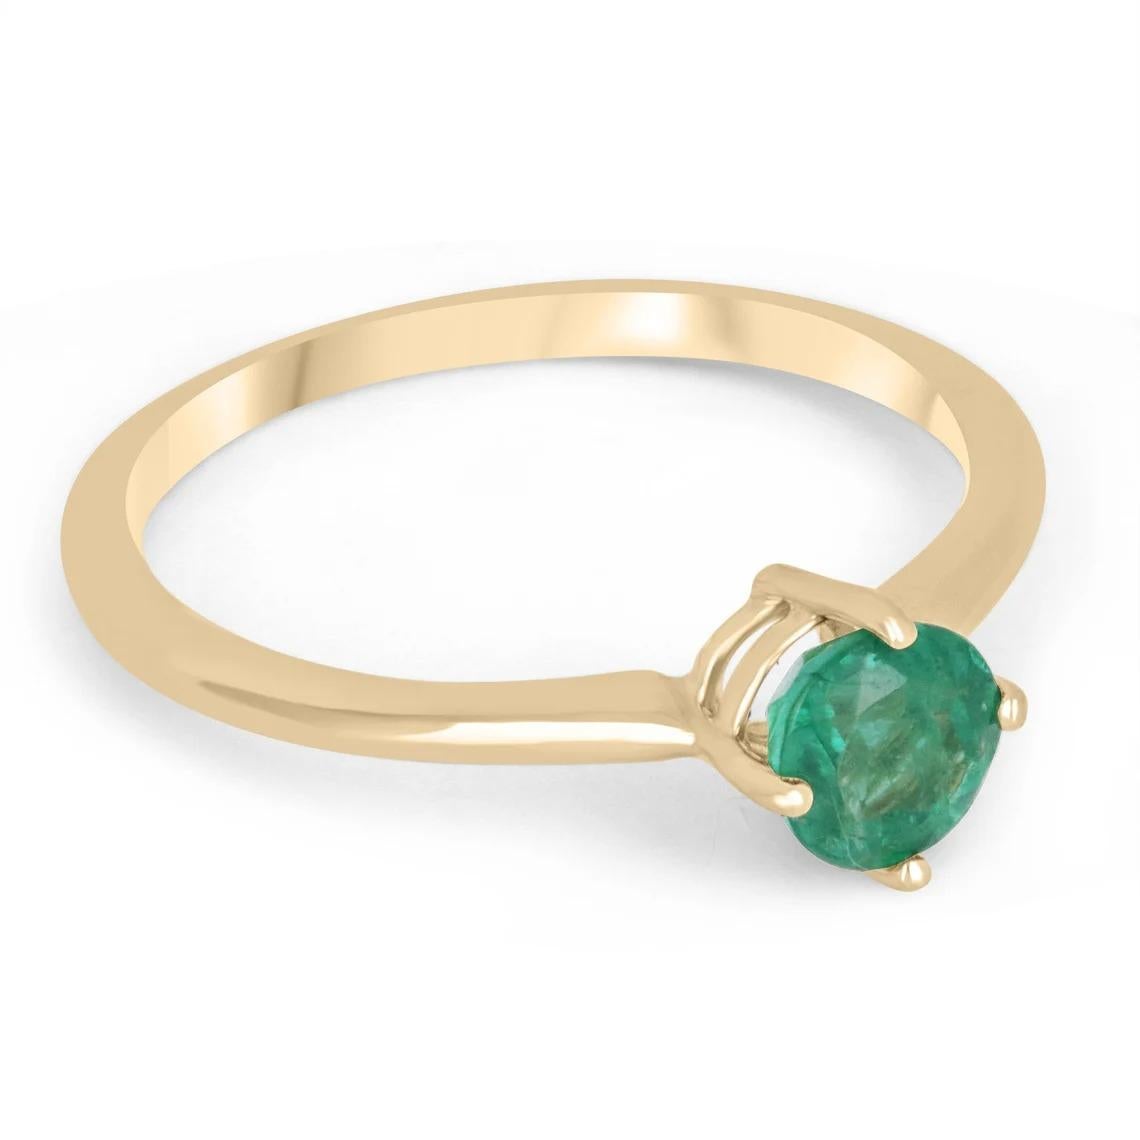 Displayed is a classic emerald solitaire, round-cut, engagement ring in 14K yellow gold. This gorgeous solitaire ring carries a full 0.30-carat emerald in a four-prong setting. Fully faceted, this gemstone showcases excellent shine. The emerald has